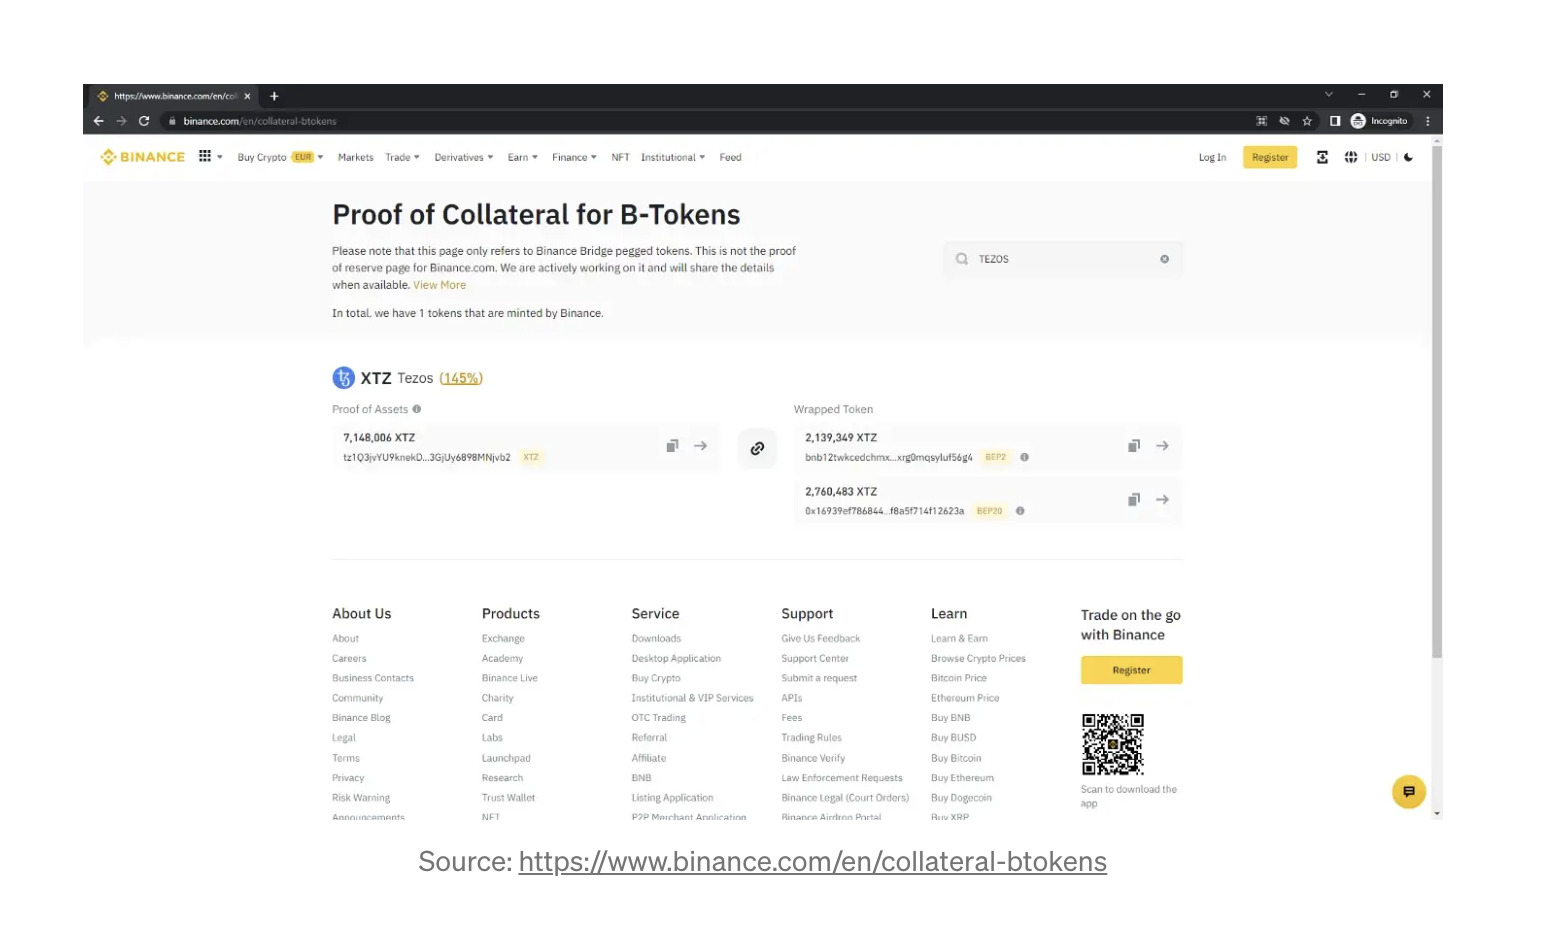 The_Tezos_wallet_address_that_Binance_offers_as_Proof_of_Collateral_for_B-Tokens.png